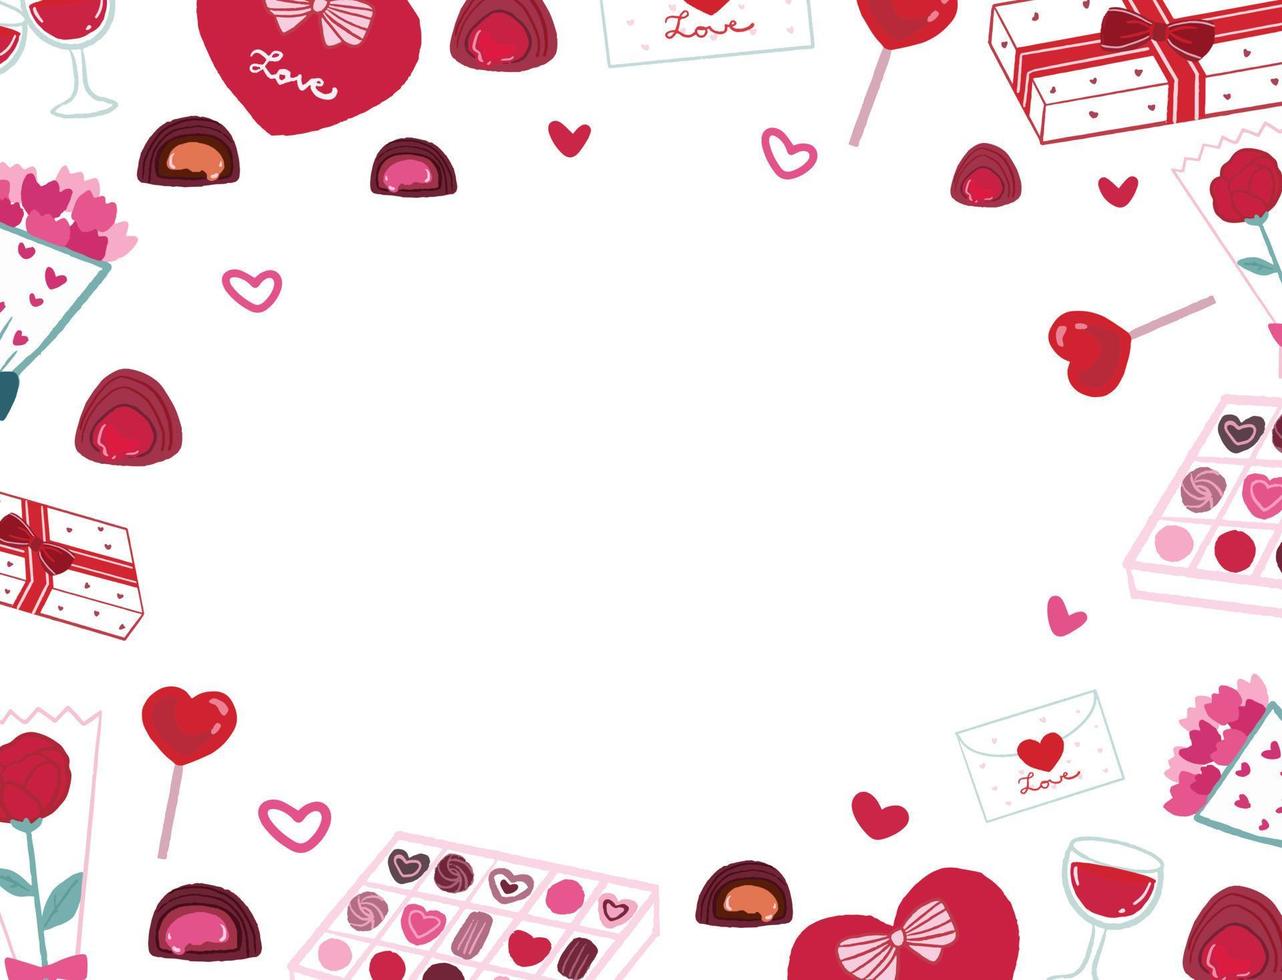 Romantic Valentines Day elements frame pattern vector